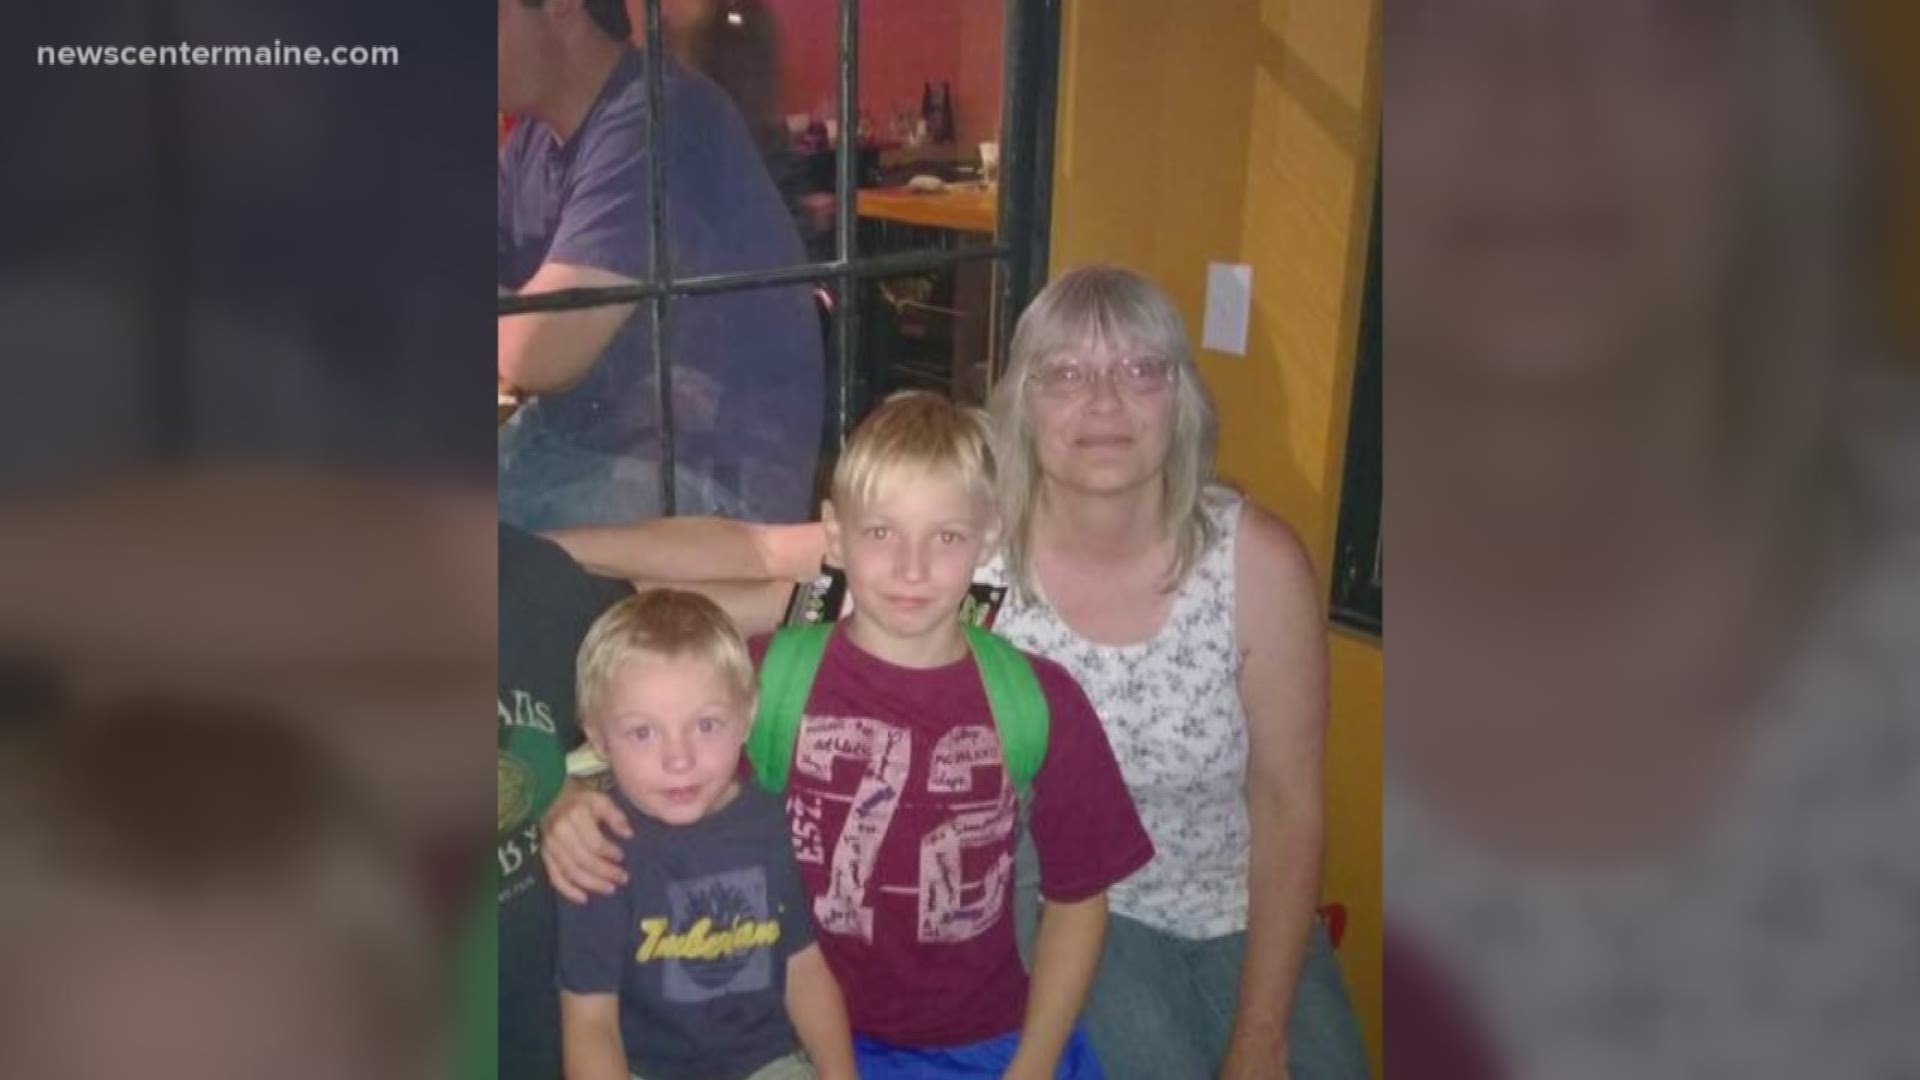 It's about a grandmother -- desperately trying to get custody of her two grandsons who are wards of the state. Their mother is accused of having a meth lab in her house, a charge she denies.